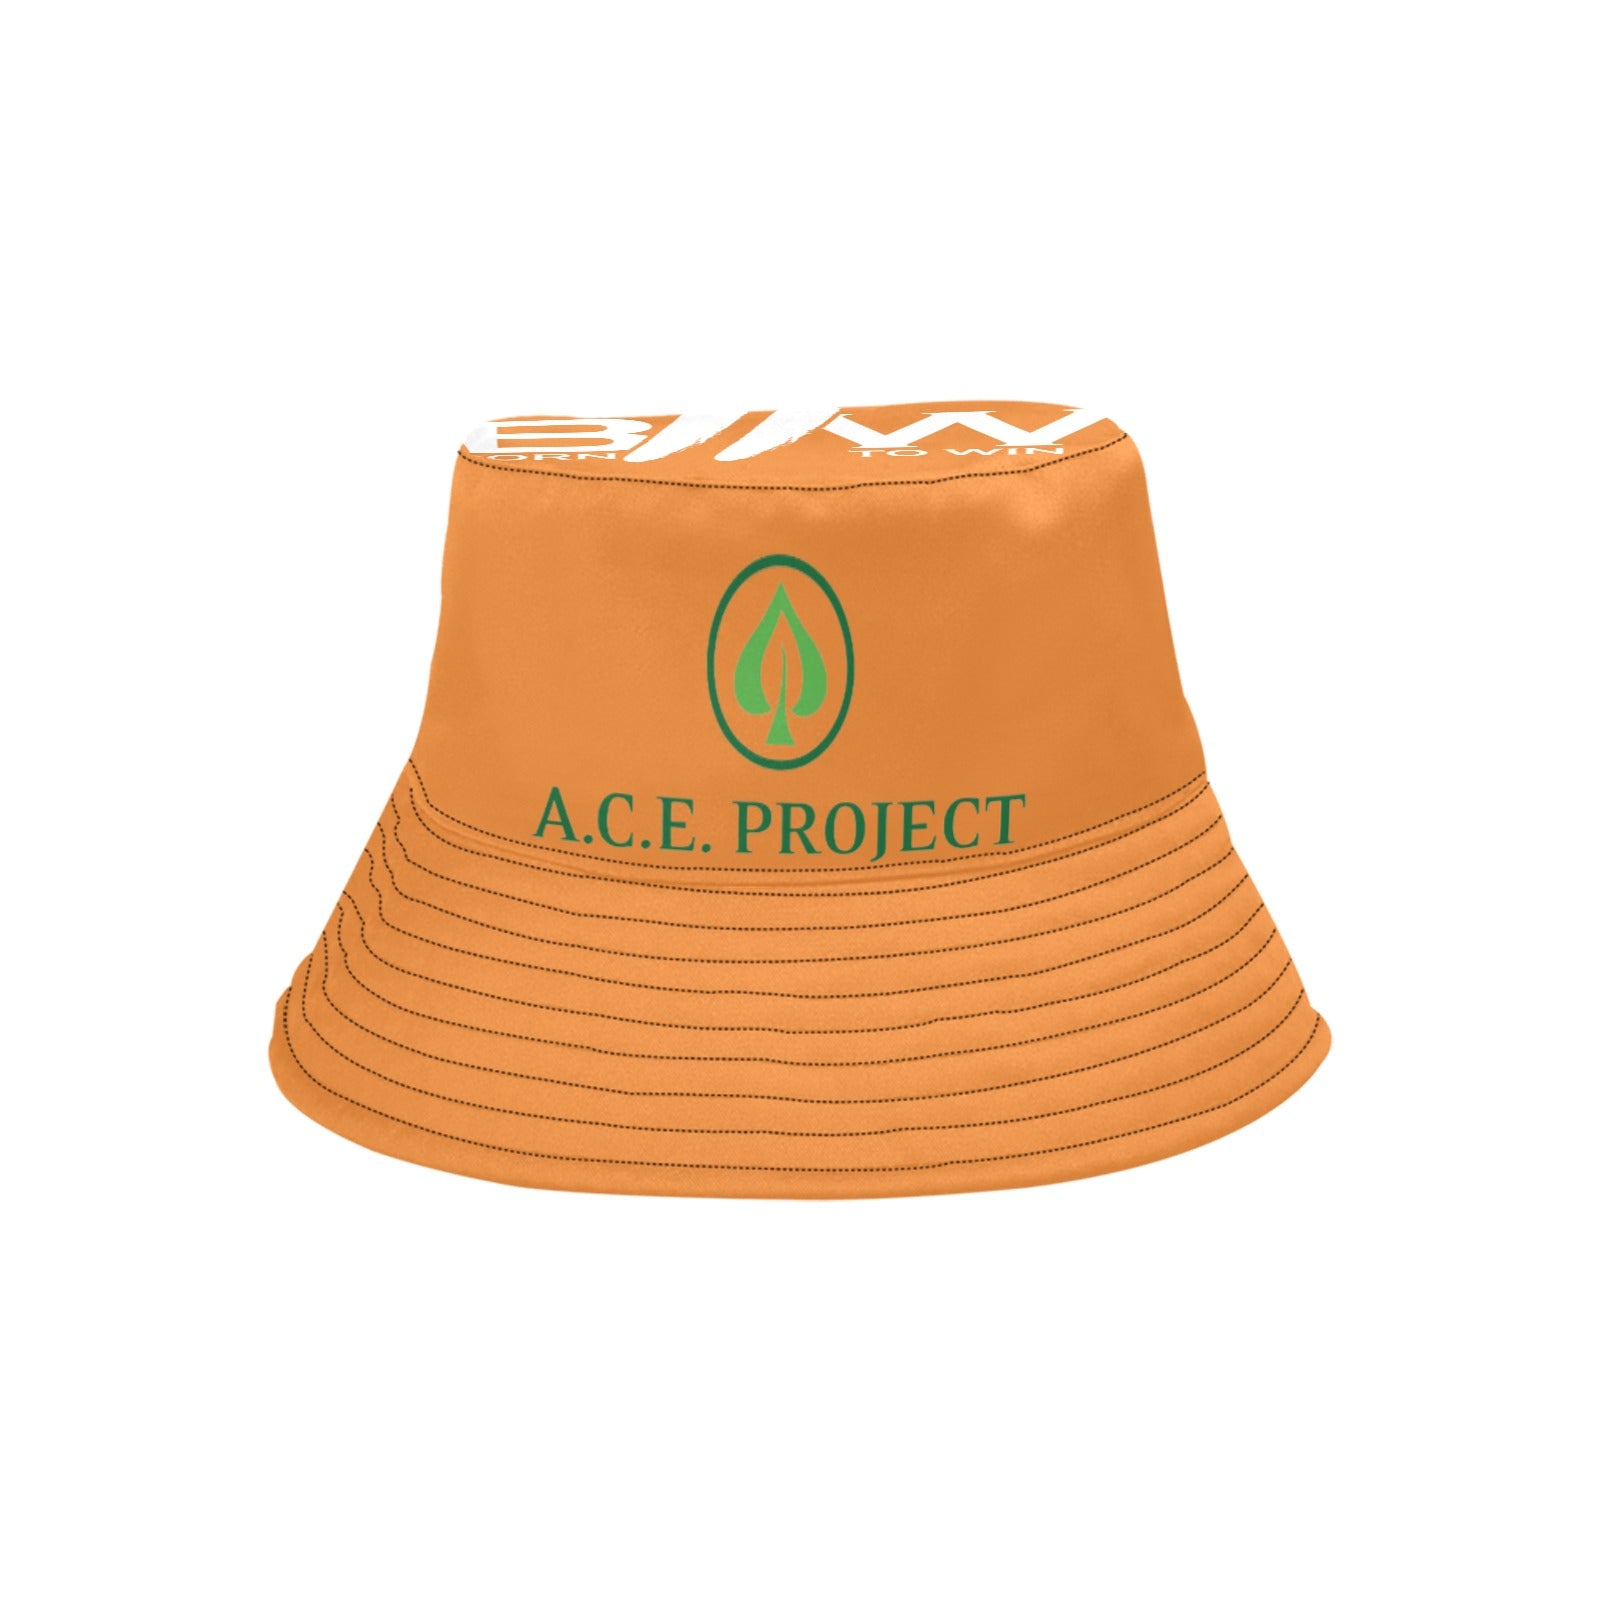 Ace project Bucket Hat